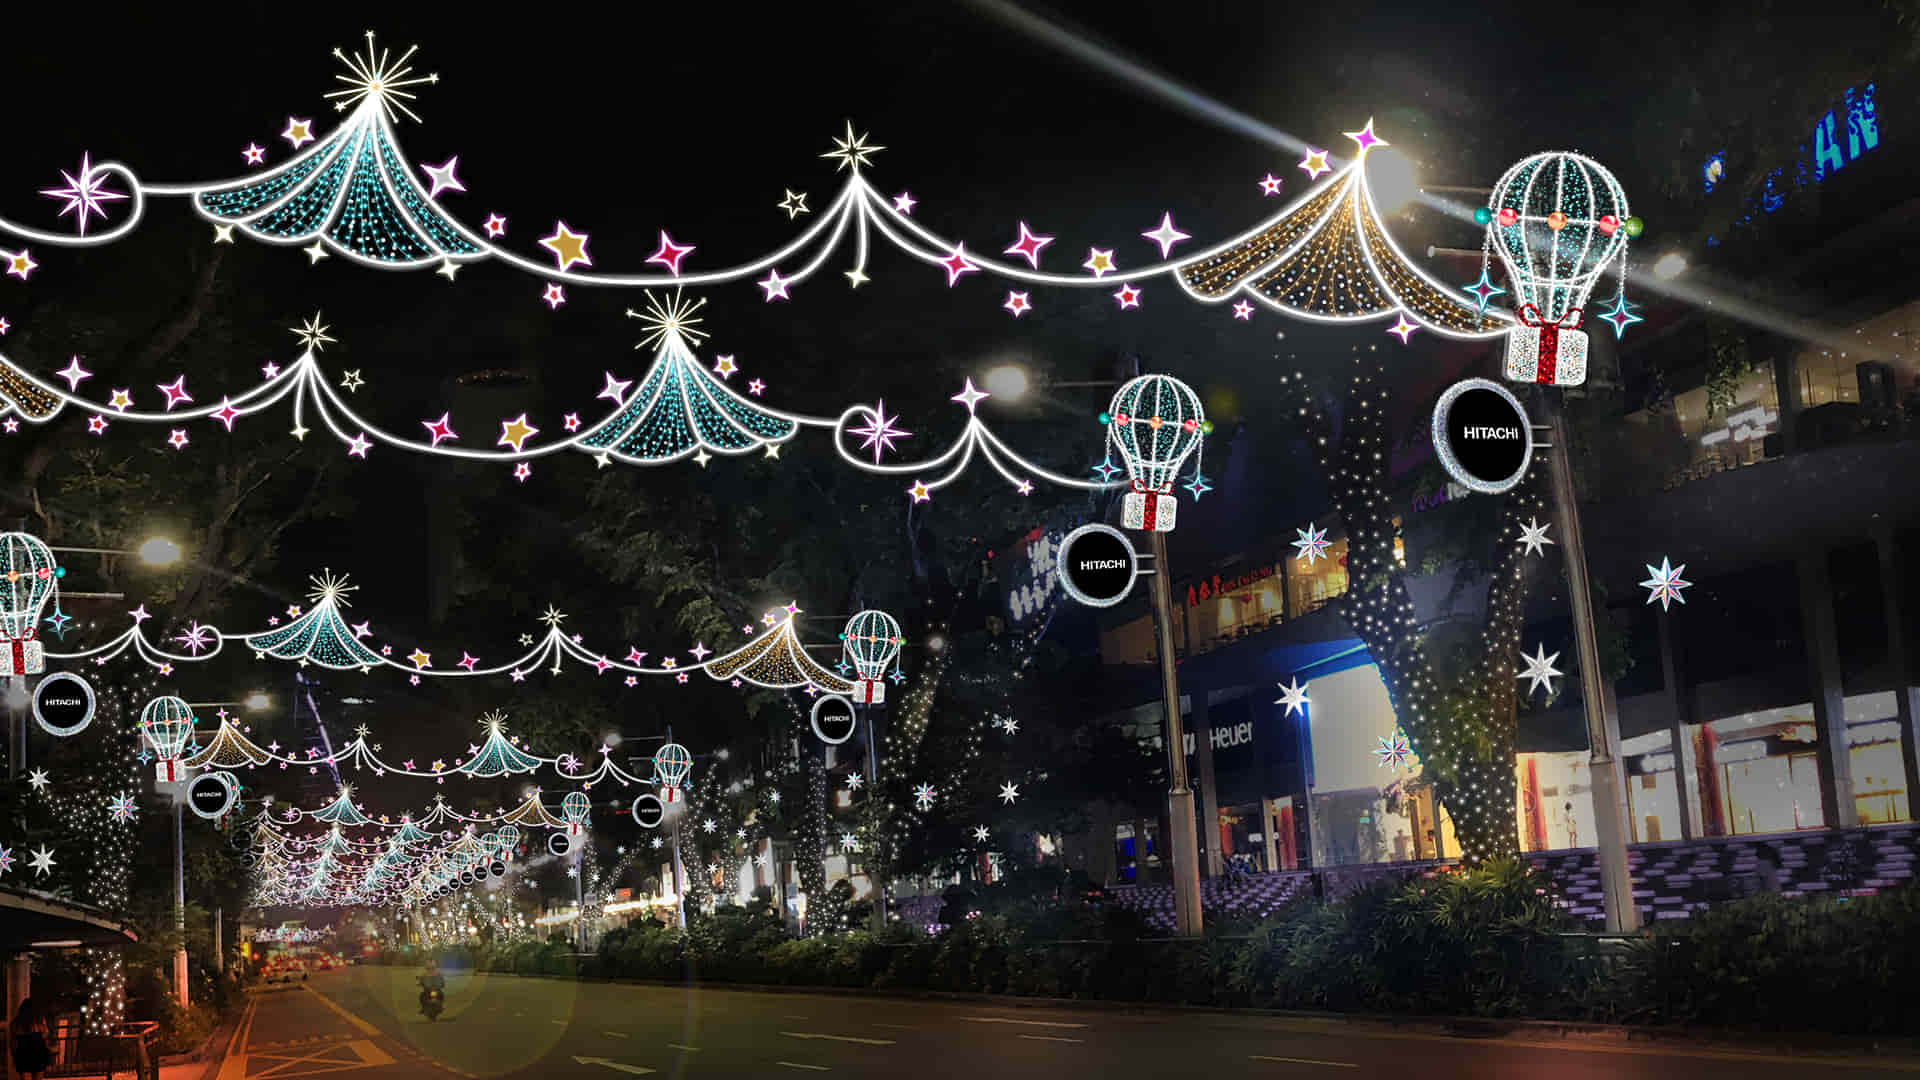 Orchard Road Christmas LightUp Begins 12 Nov With 3D Projections